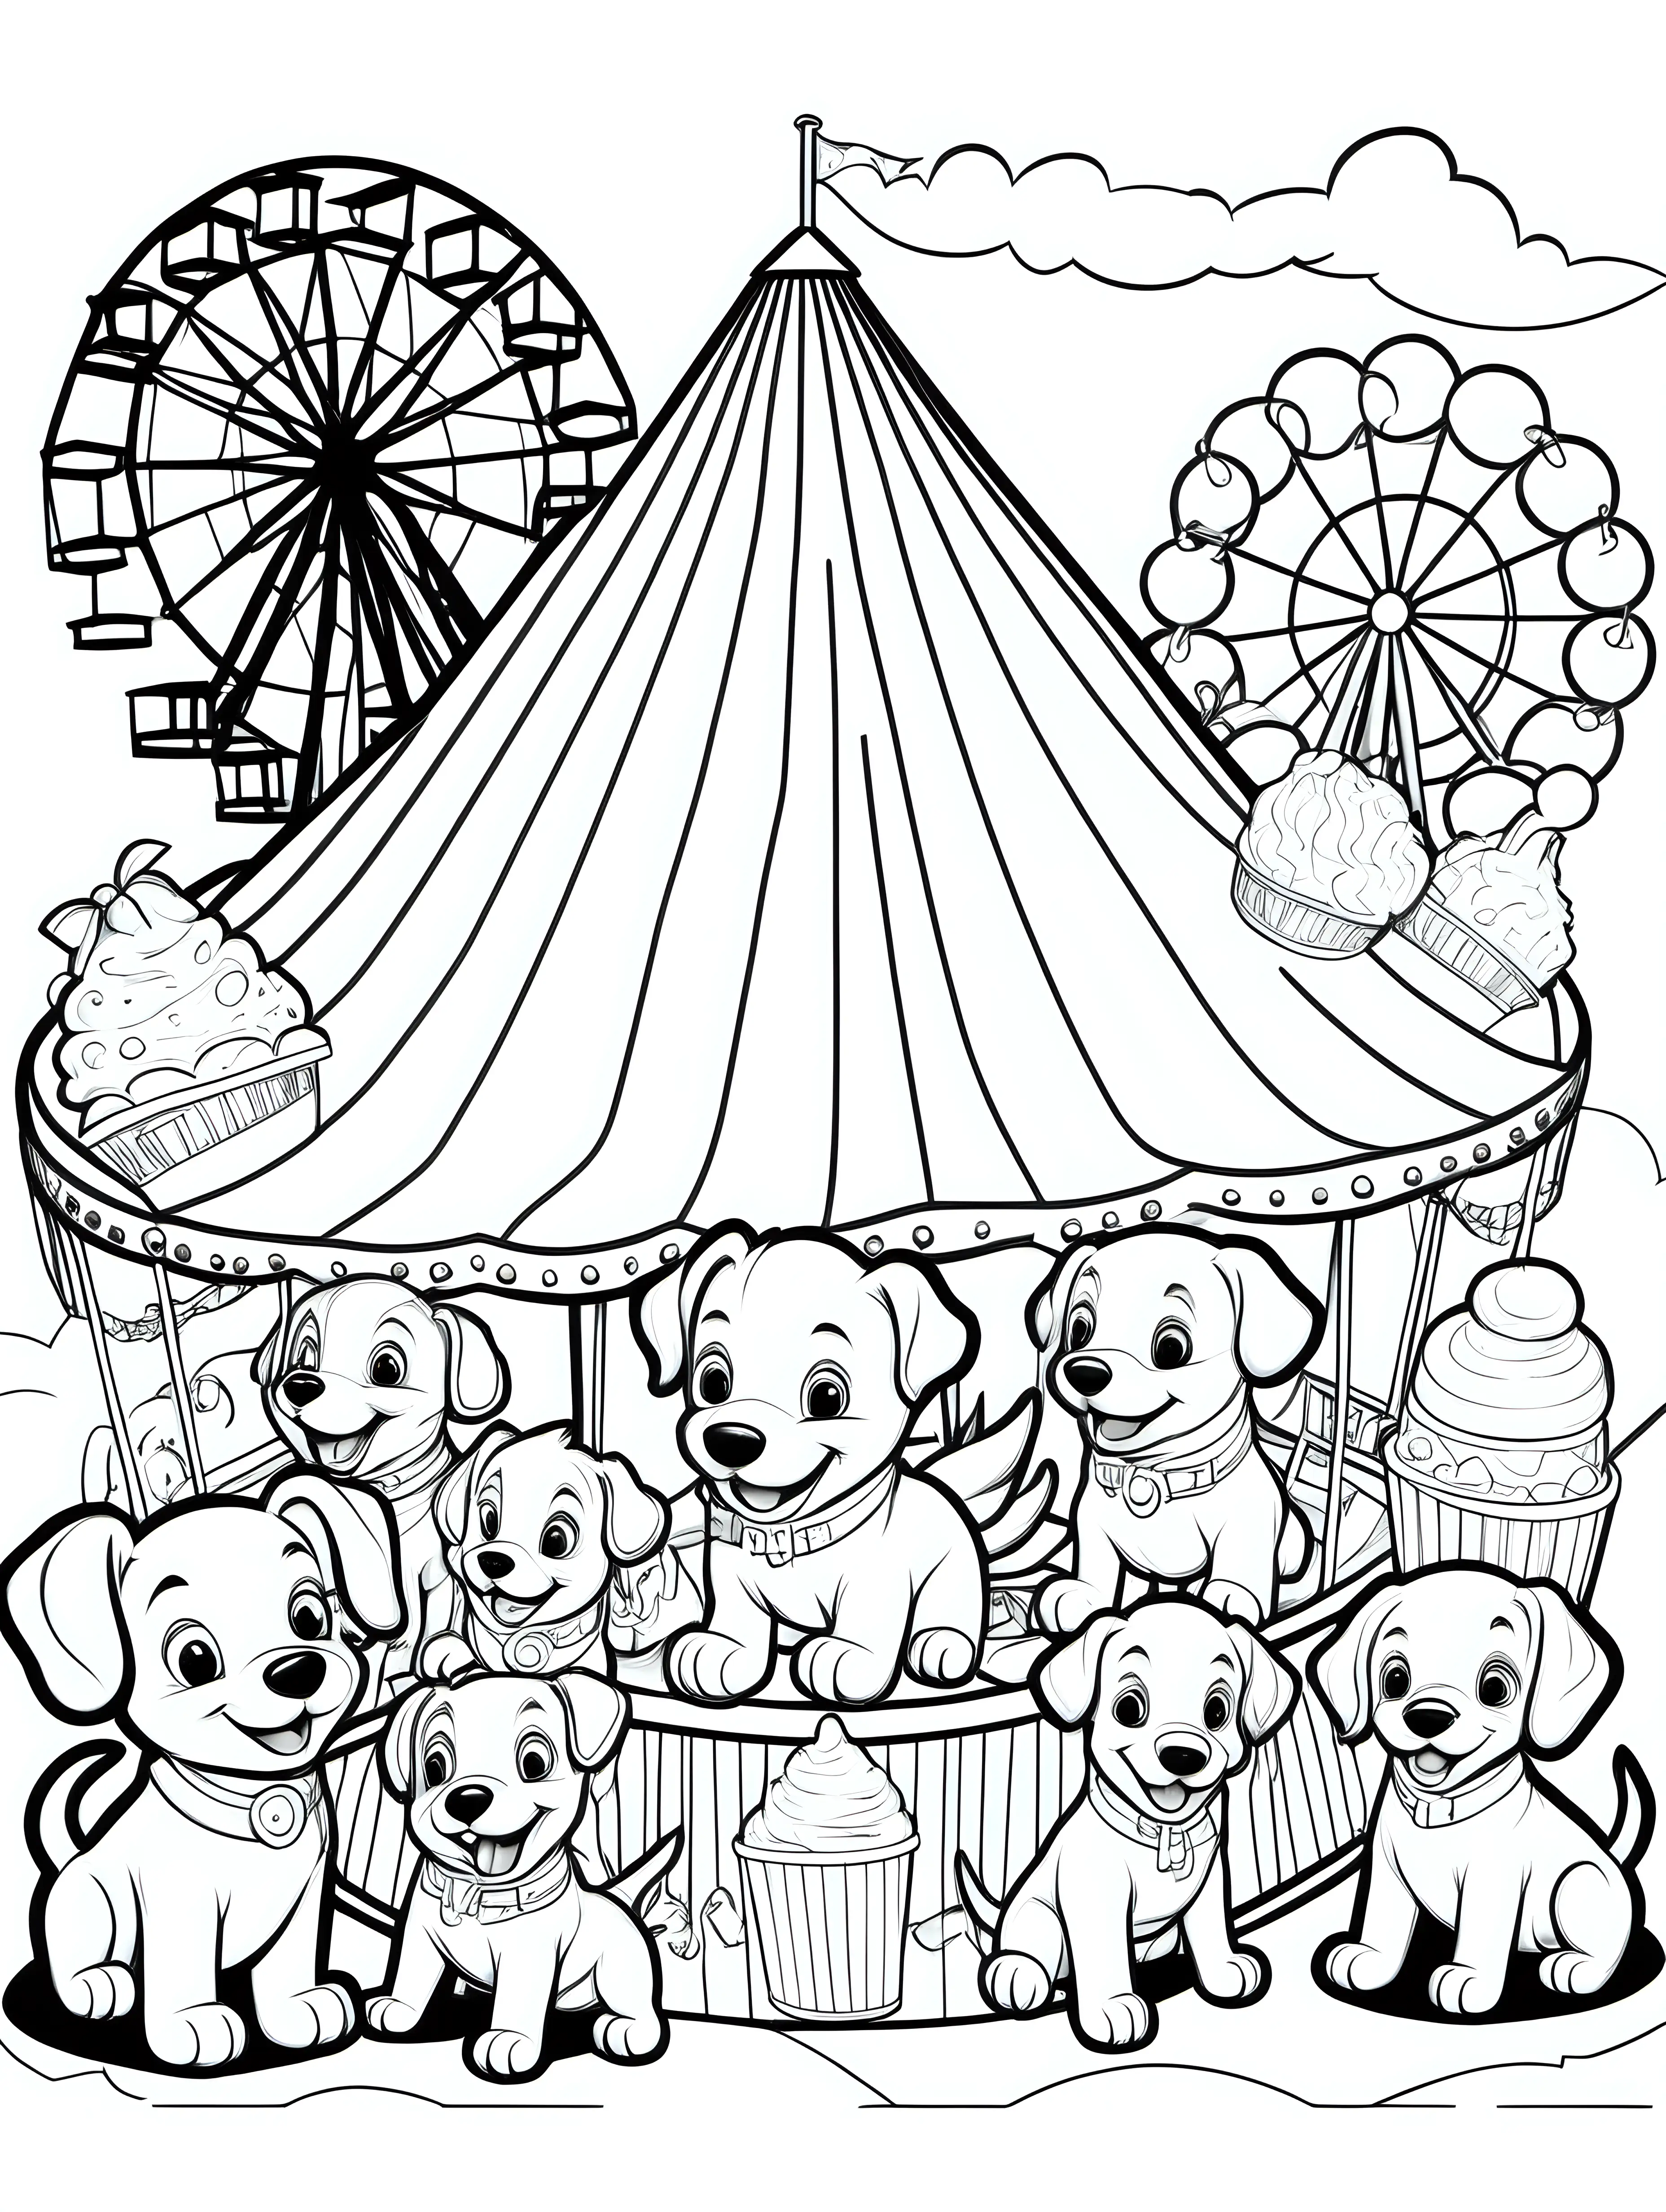 Carnival Fun Coloring Page for Kids